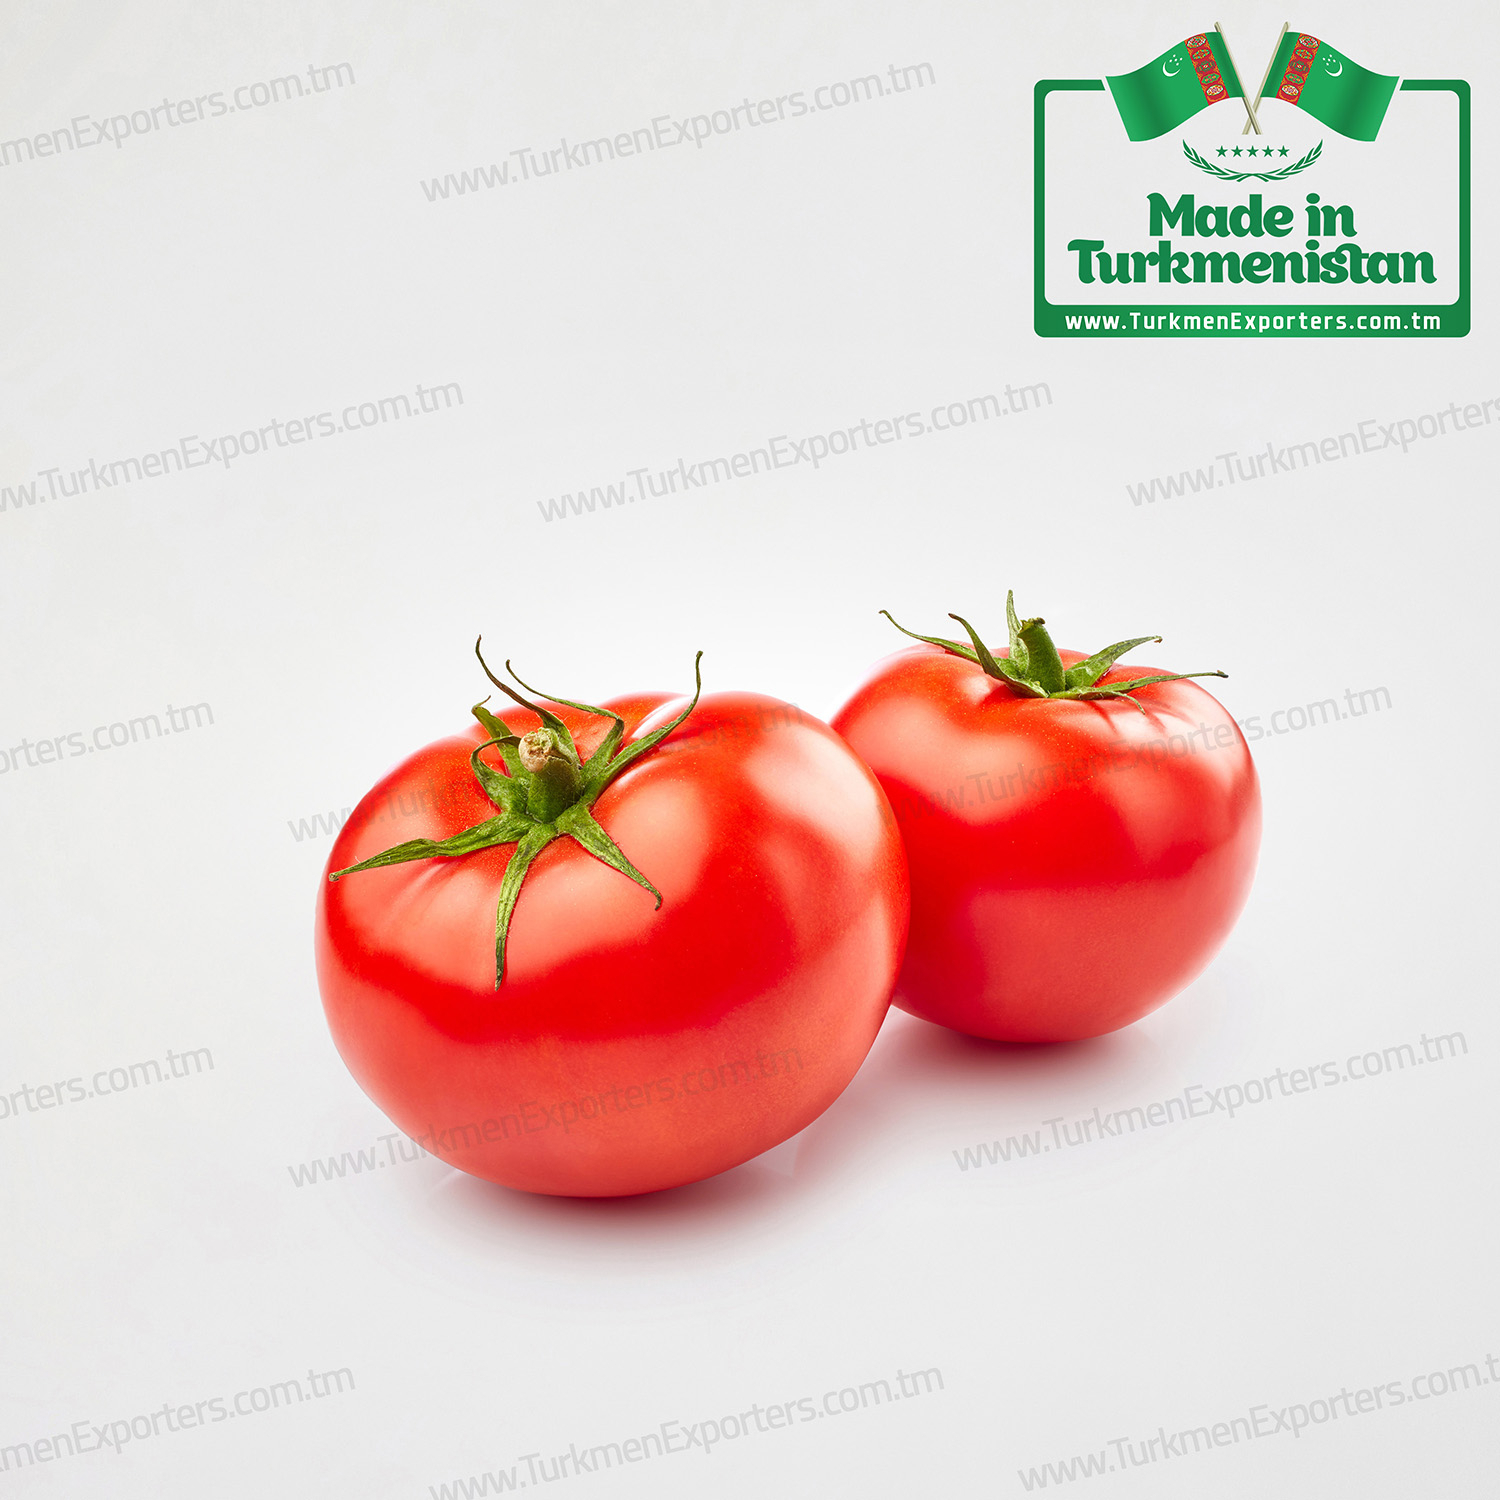 Fresh tomato in Turkmenistan wholesale for export | Greenhouse Tomatoes of Turkmenistan